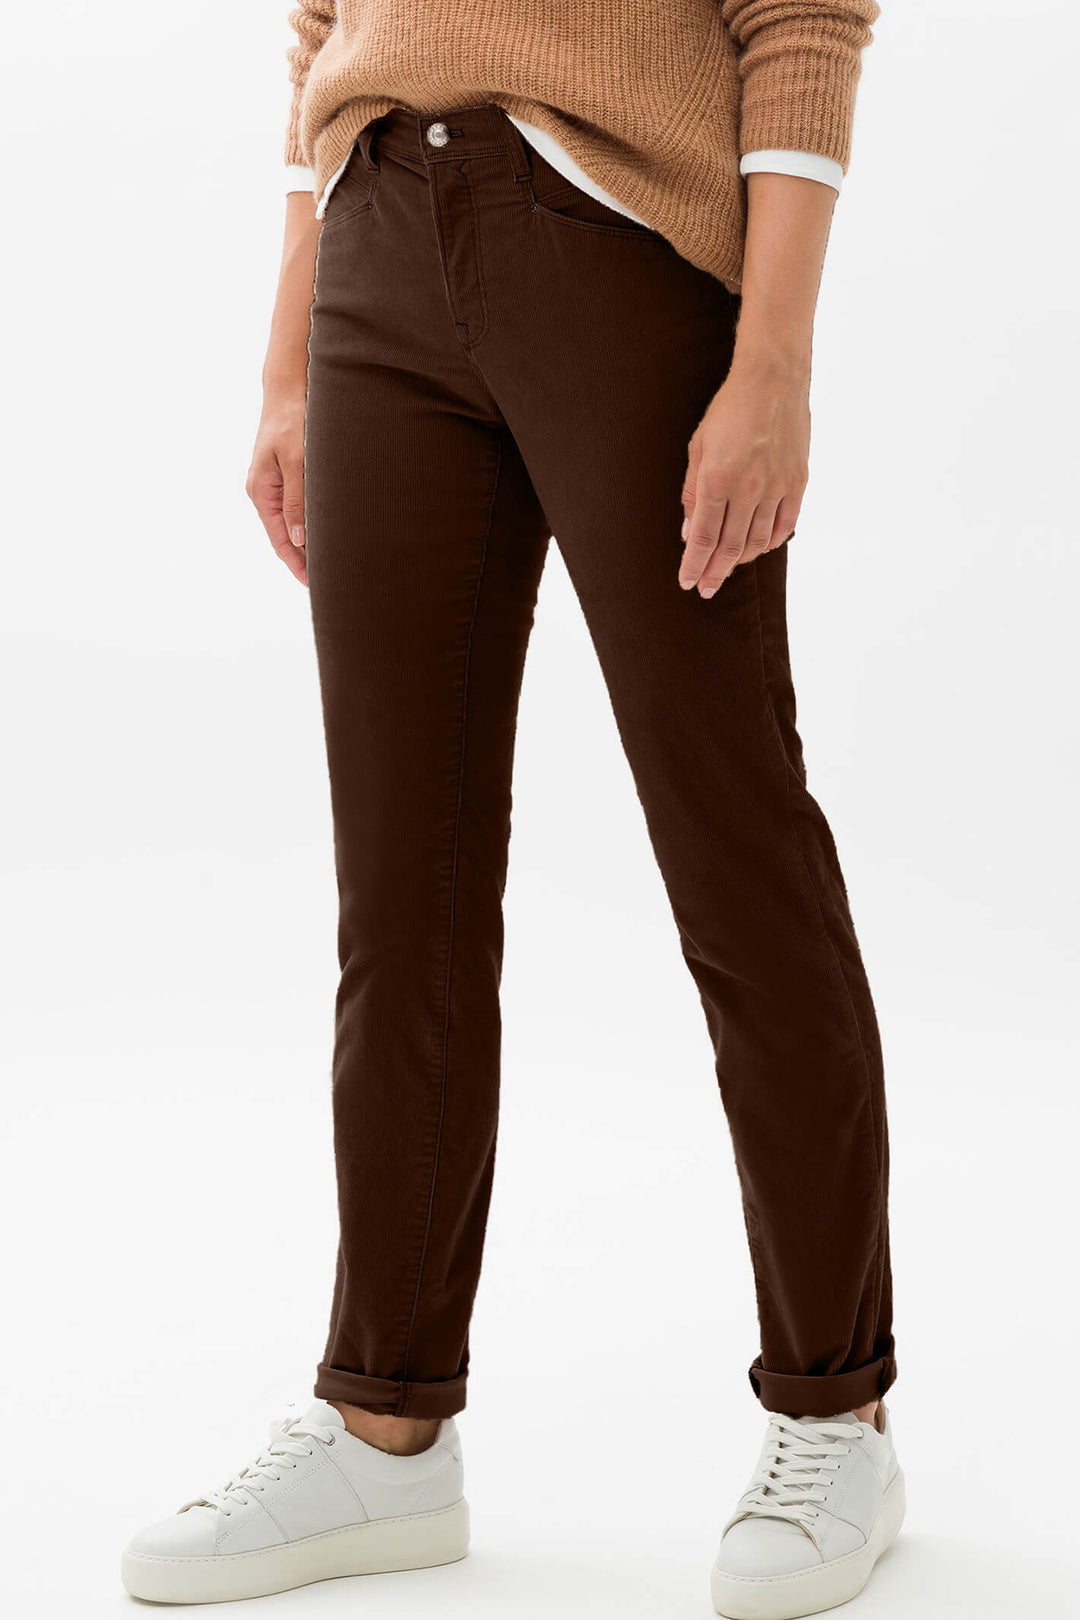 Brax Mary 73-1838 09115720 53 Chocolate Brown Five Pocket Cord Jeans - Shirley Allum Boutique